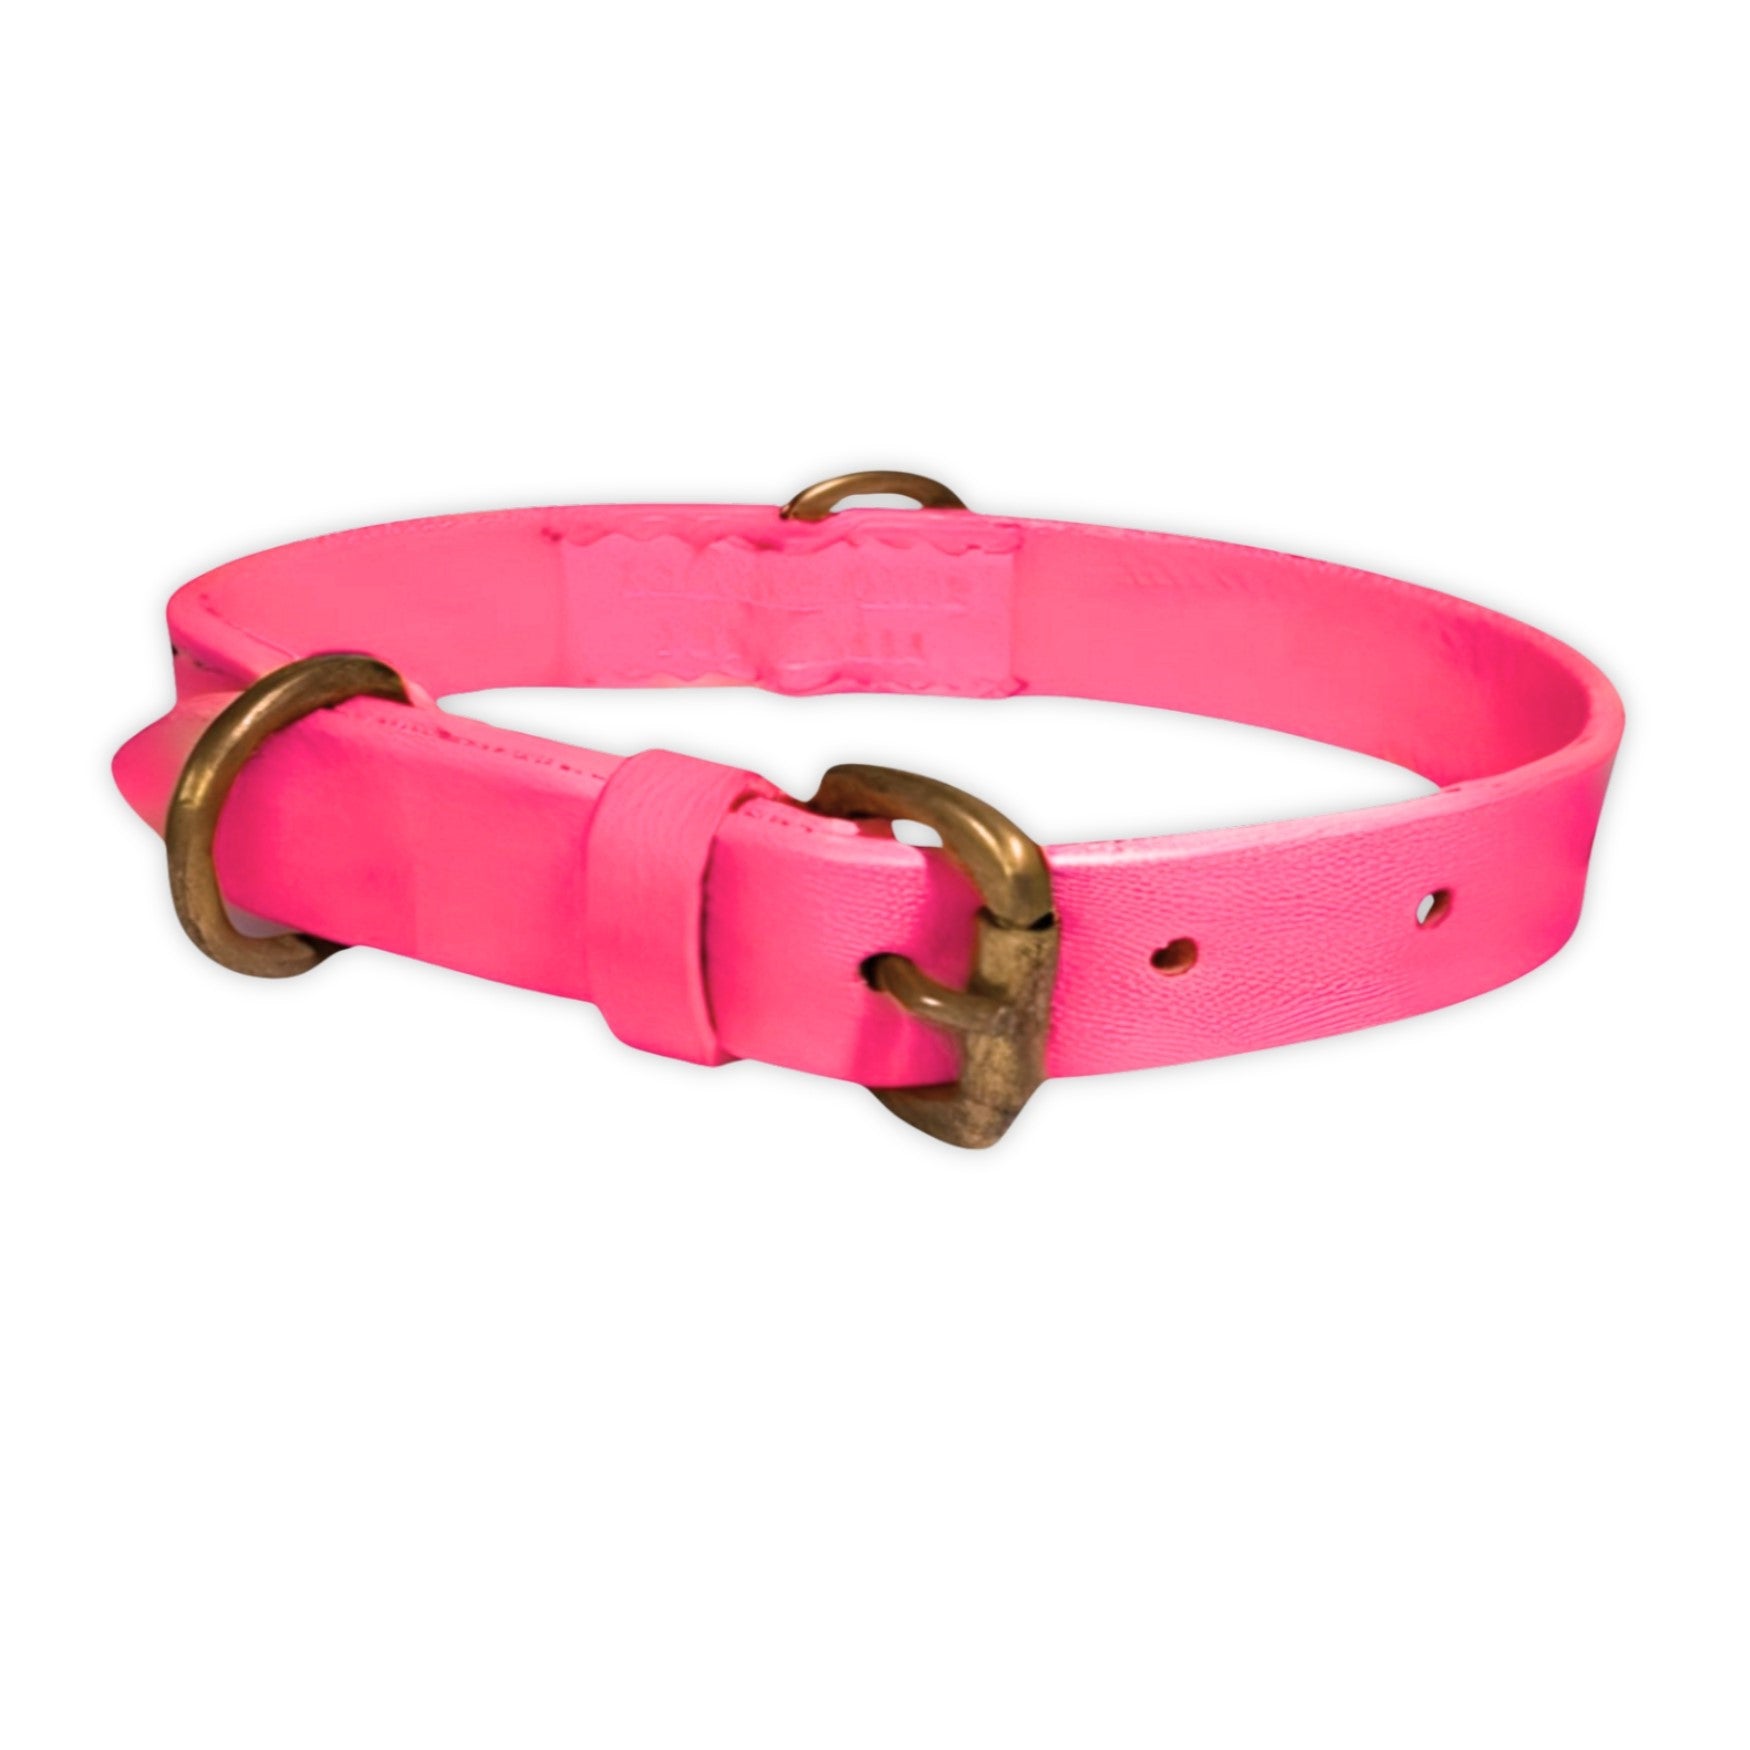 A vibrant Georgie Paws Bald Collar Hot Pink dog collar with a golden buckle and loop, featuring an adjustable band and a small loop for tags, isolated on a white background.